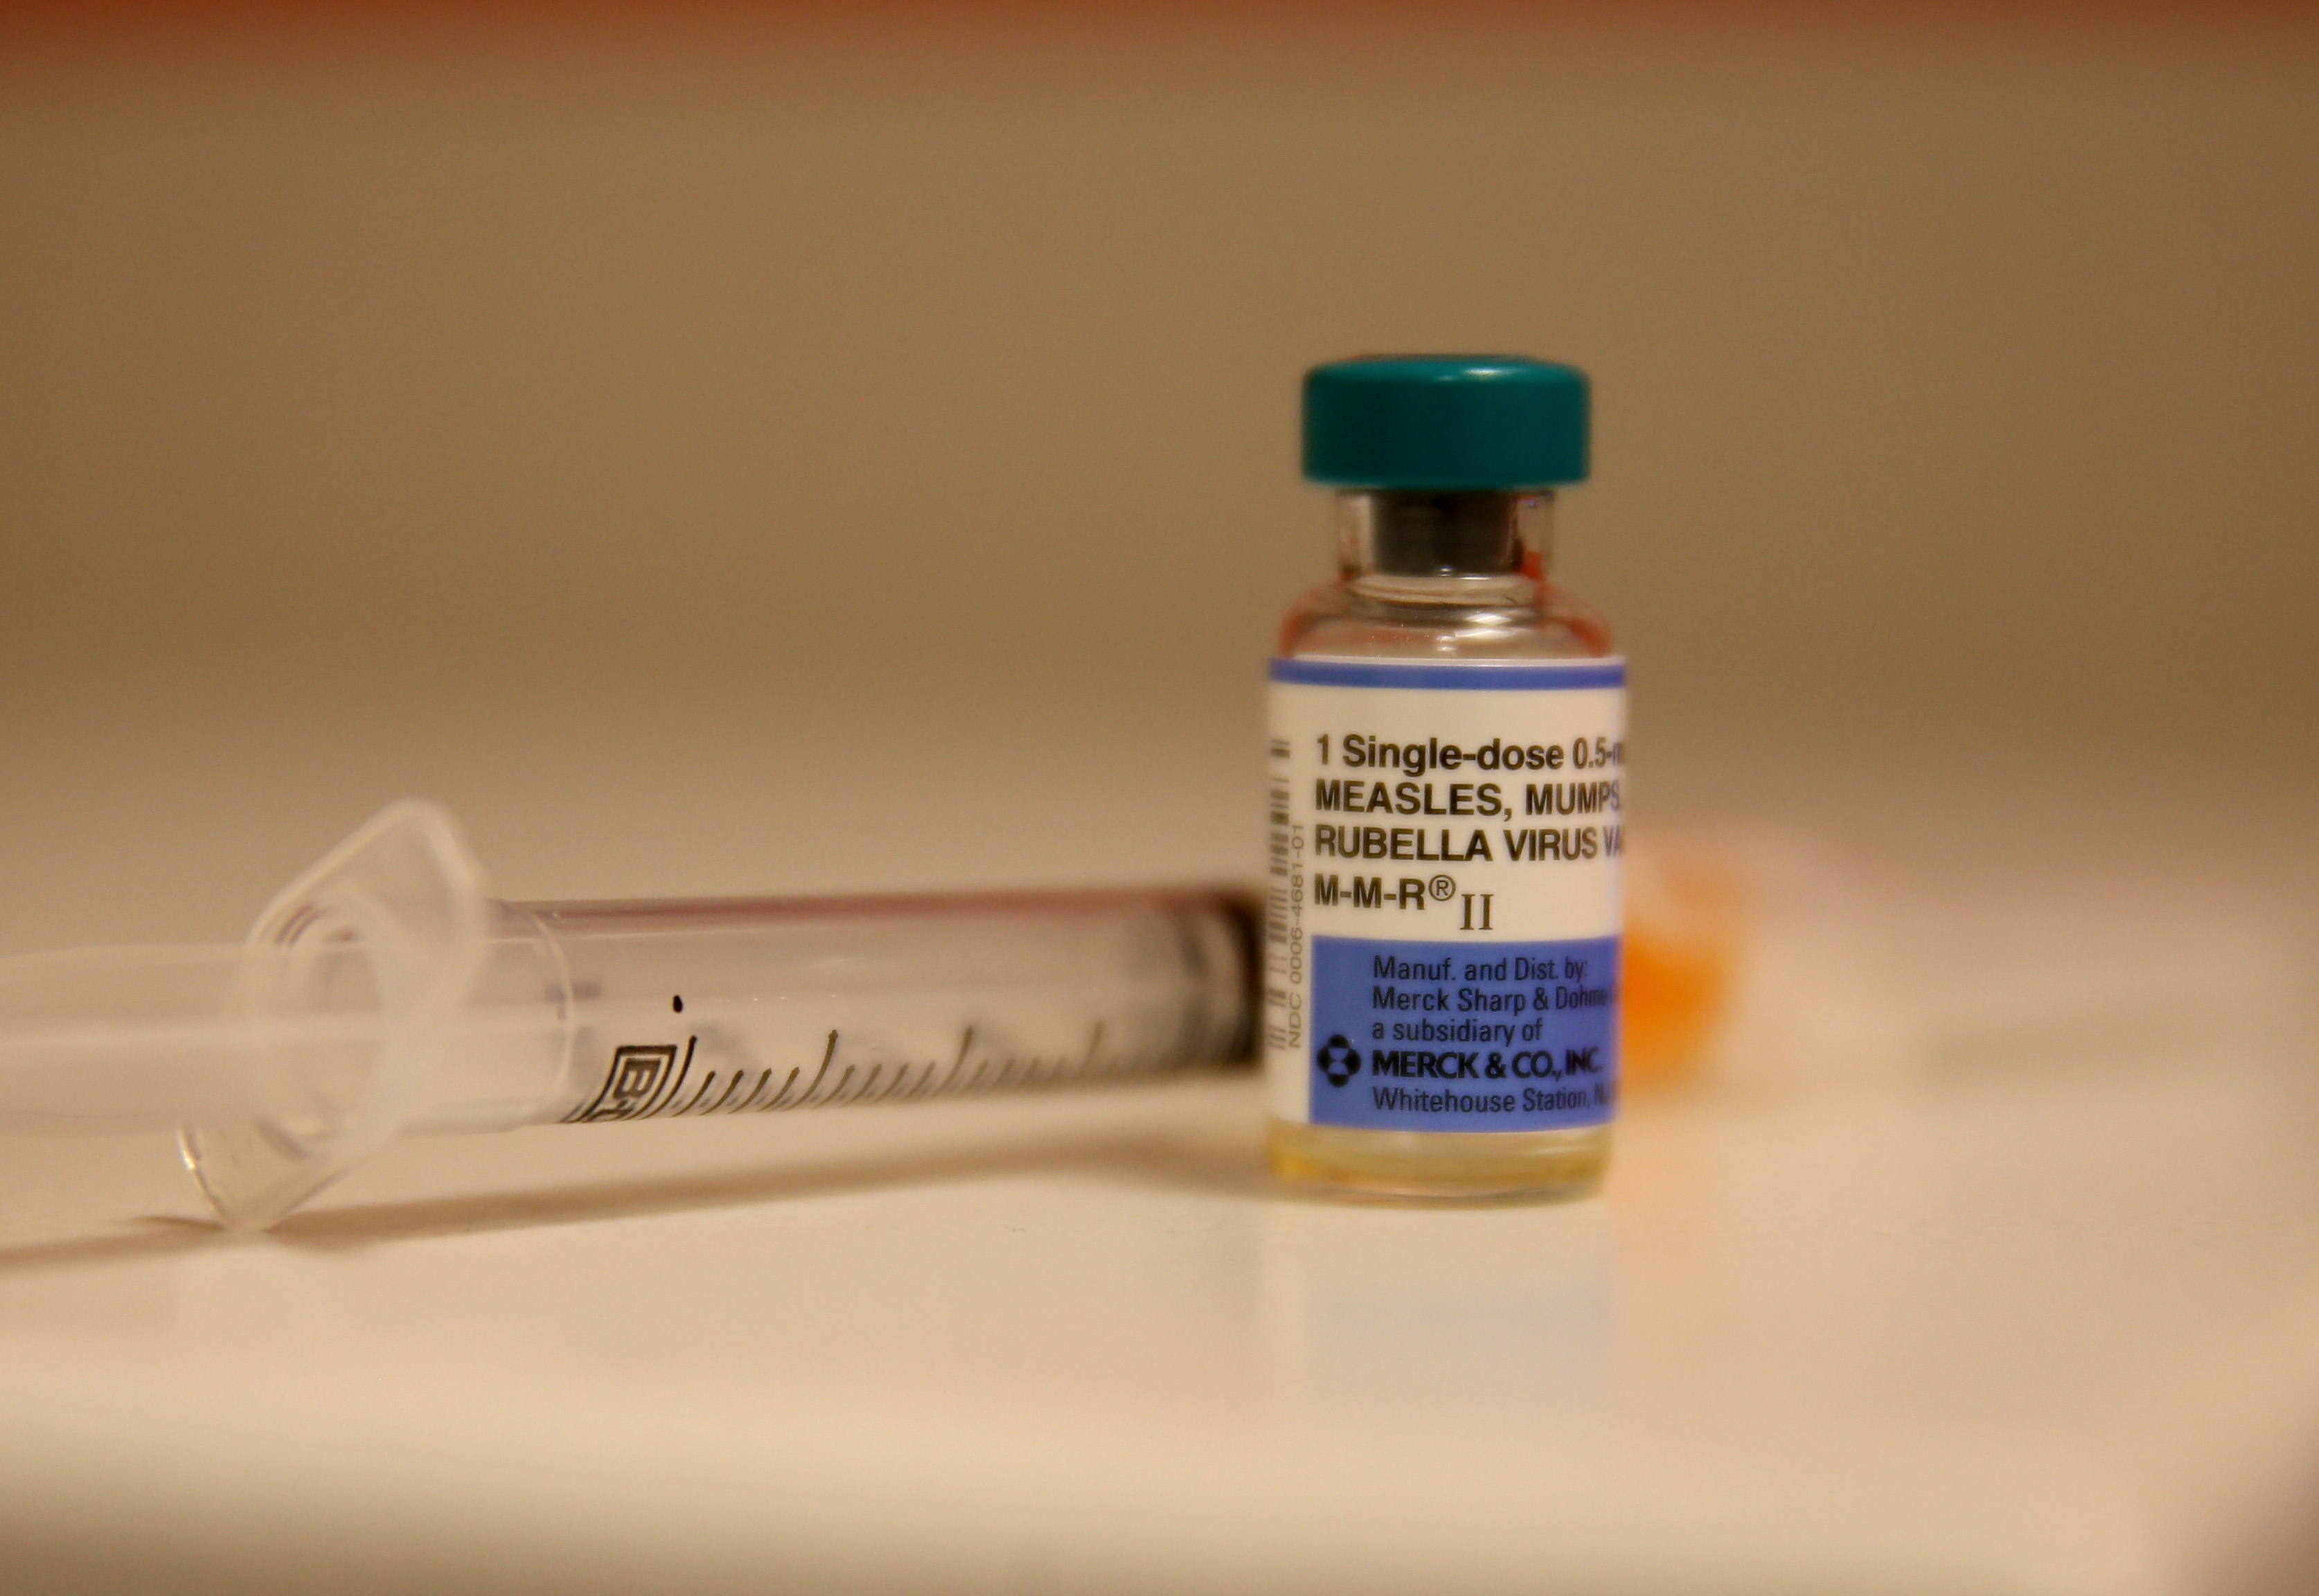 A bottle containing a measles vaccine is seen at the Miami Children's Hospital on Jan. 28, 2015 in Miami, Florida. (Joe Raedle—Getty Images)